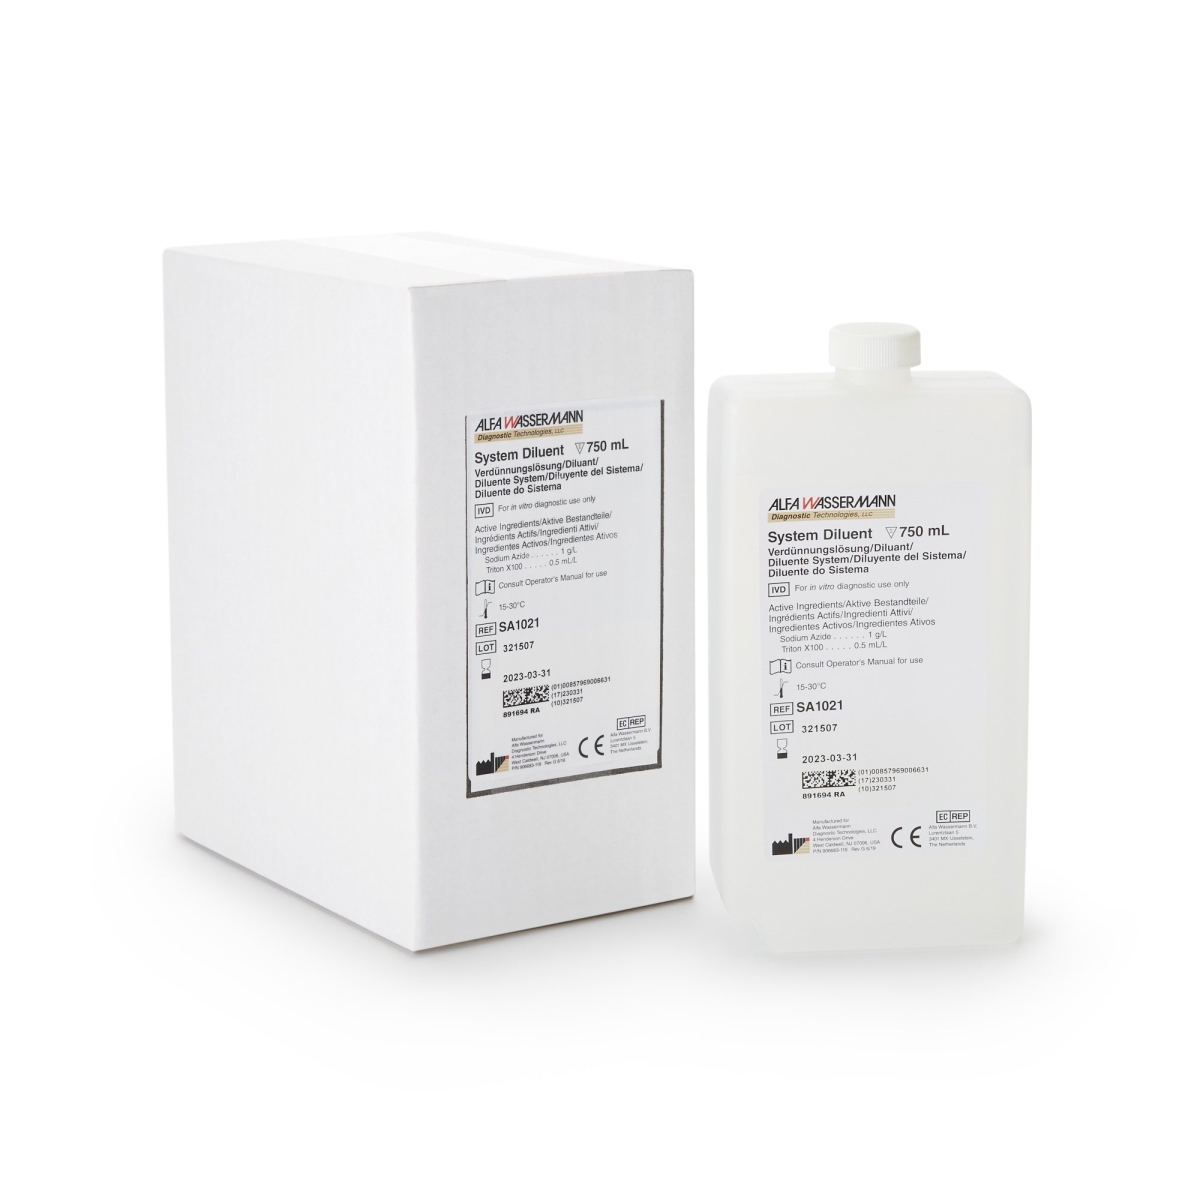 Picture of Ace 334349-KT 3 x 750 ml Diluent Reagent